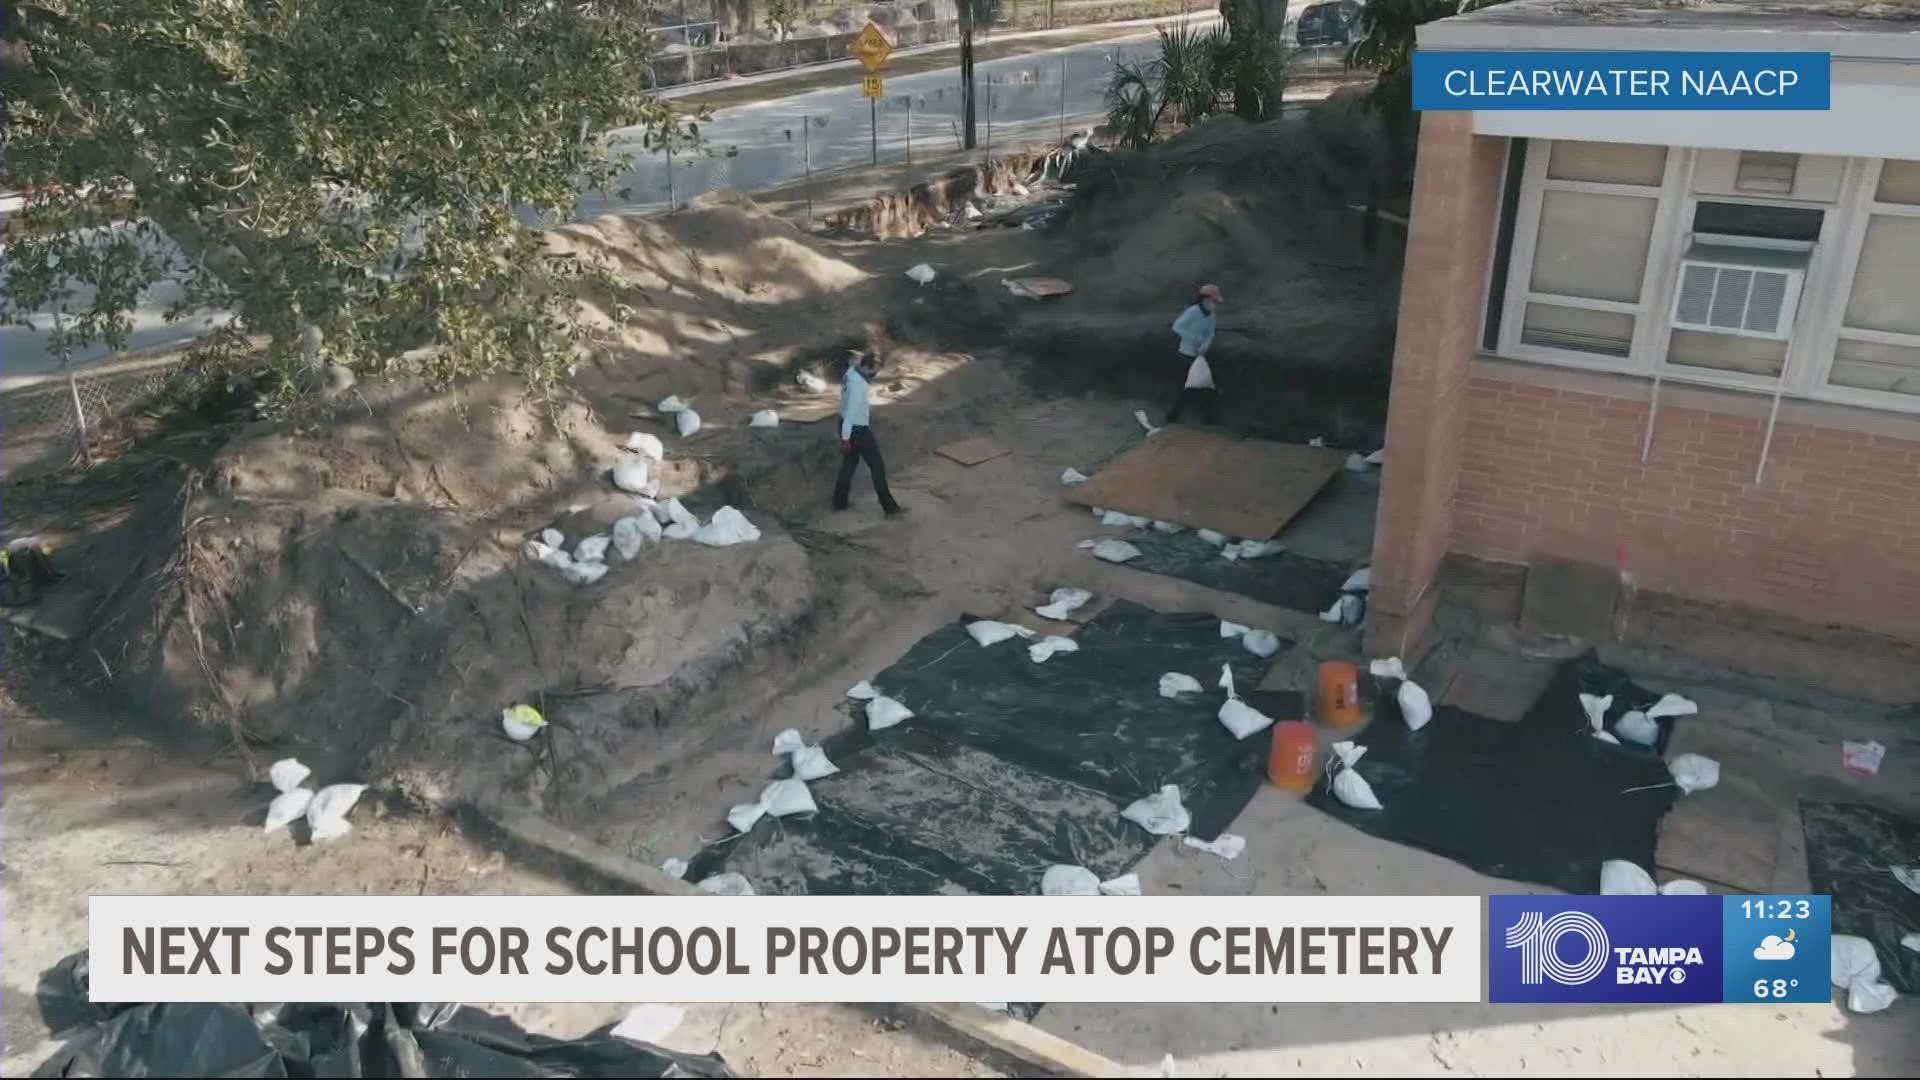 Archeologists found 54 graves from North Greenwood Cemetery under Curtis Fundamental Middle School, which was built on top of the destroyed cemetery.